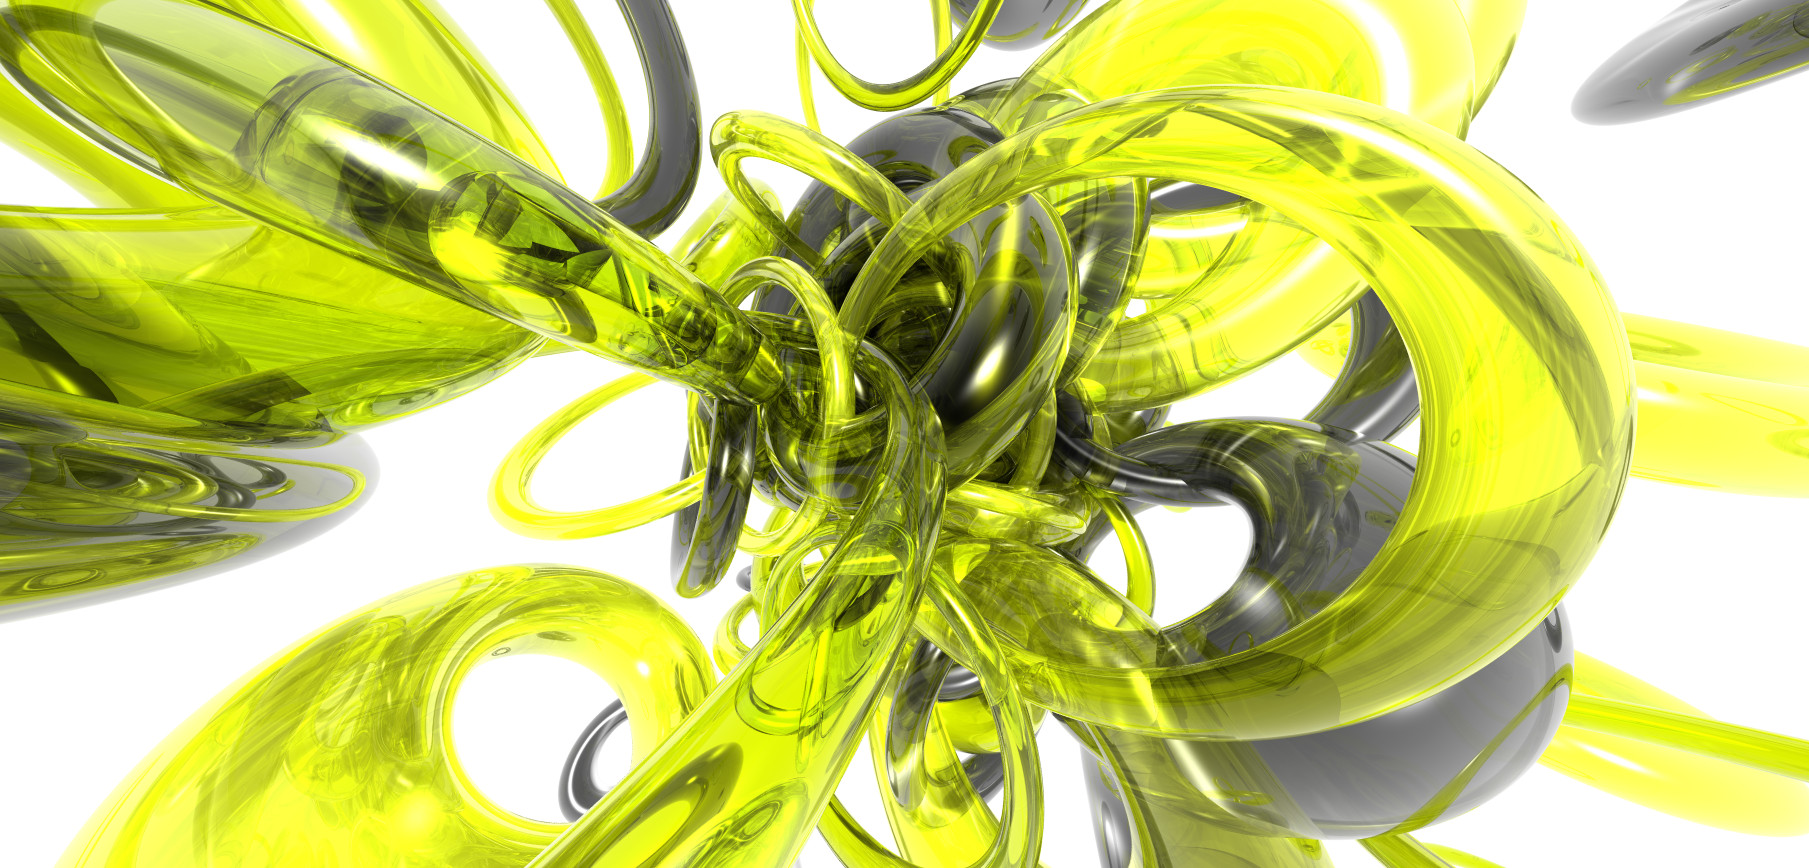 Hd Abstract Artworks Cool Desktop Images Amazing Arts Cool 